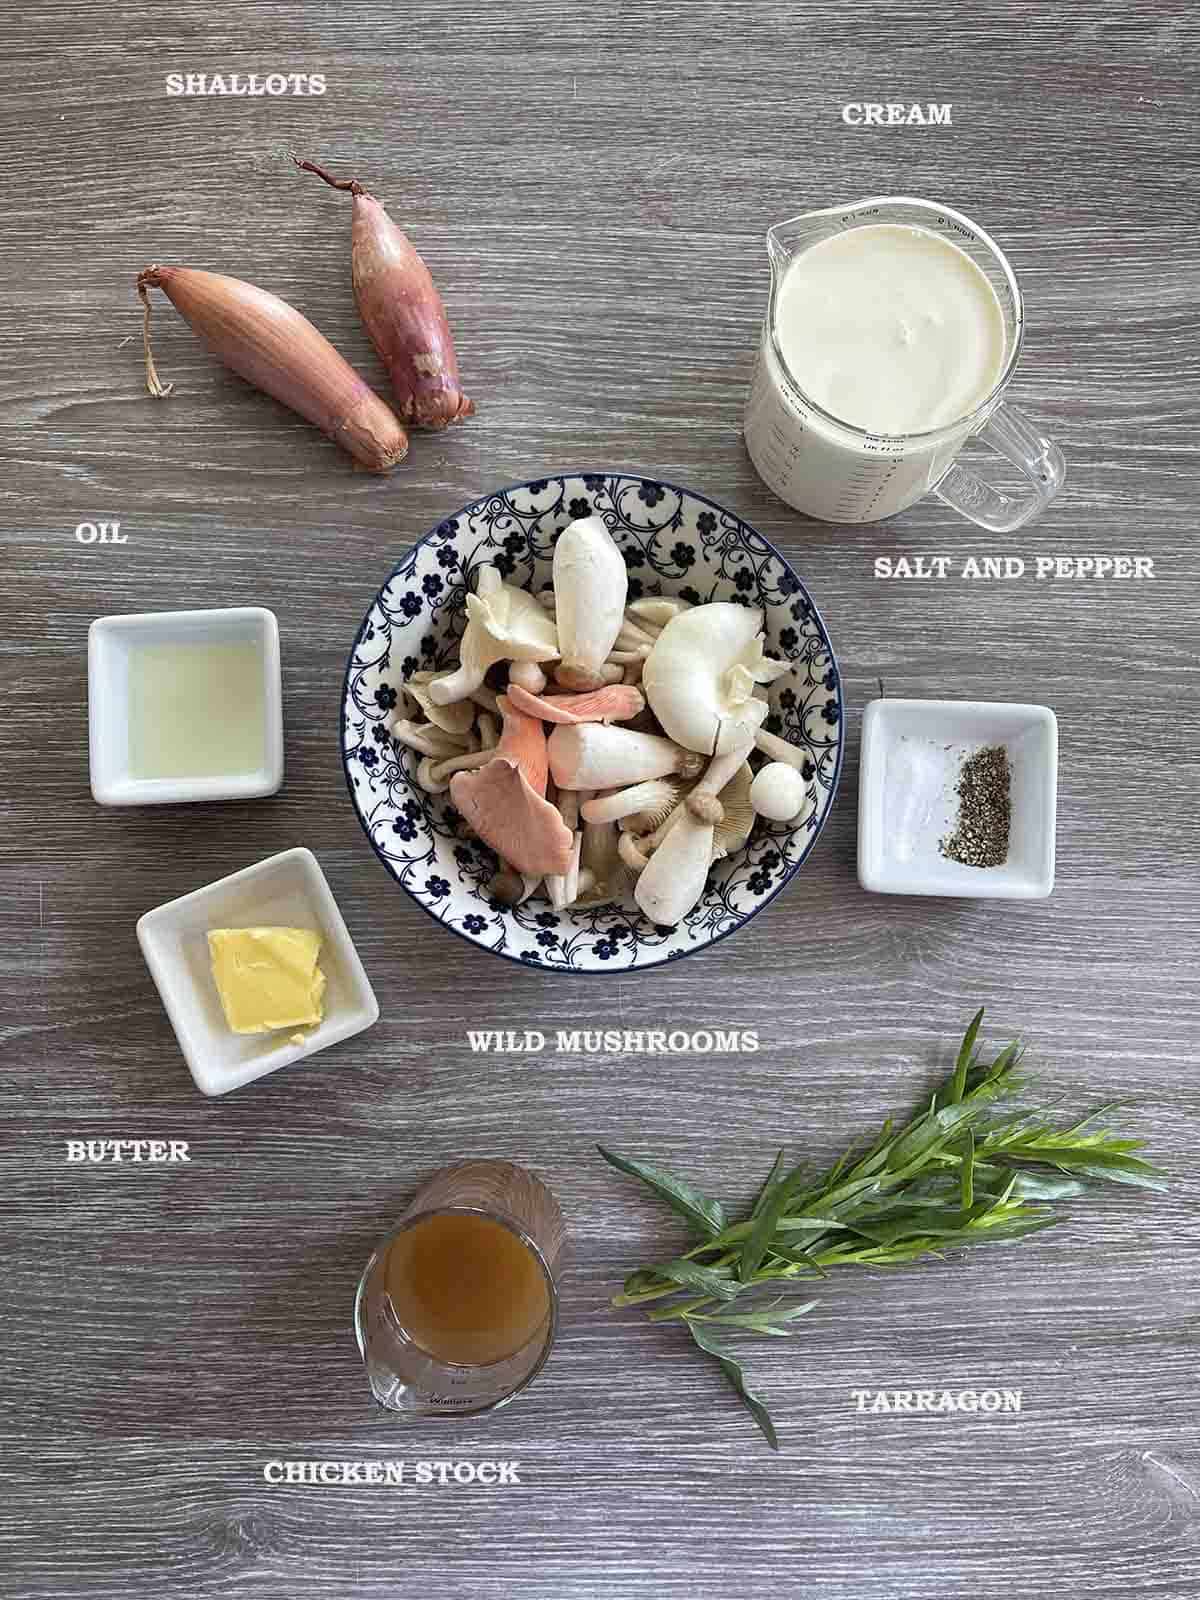 ingredients including mushrooms, cream, shallots and stock.